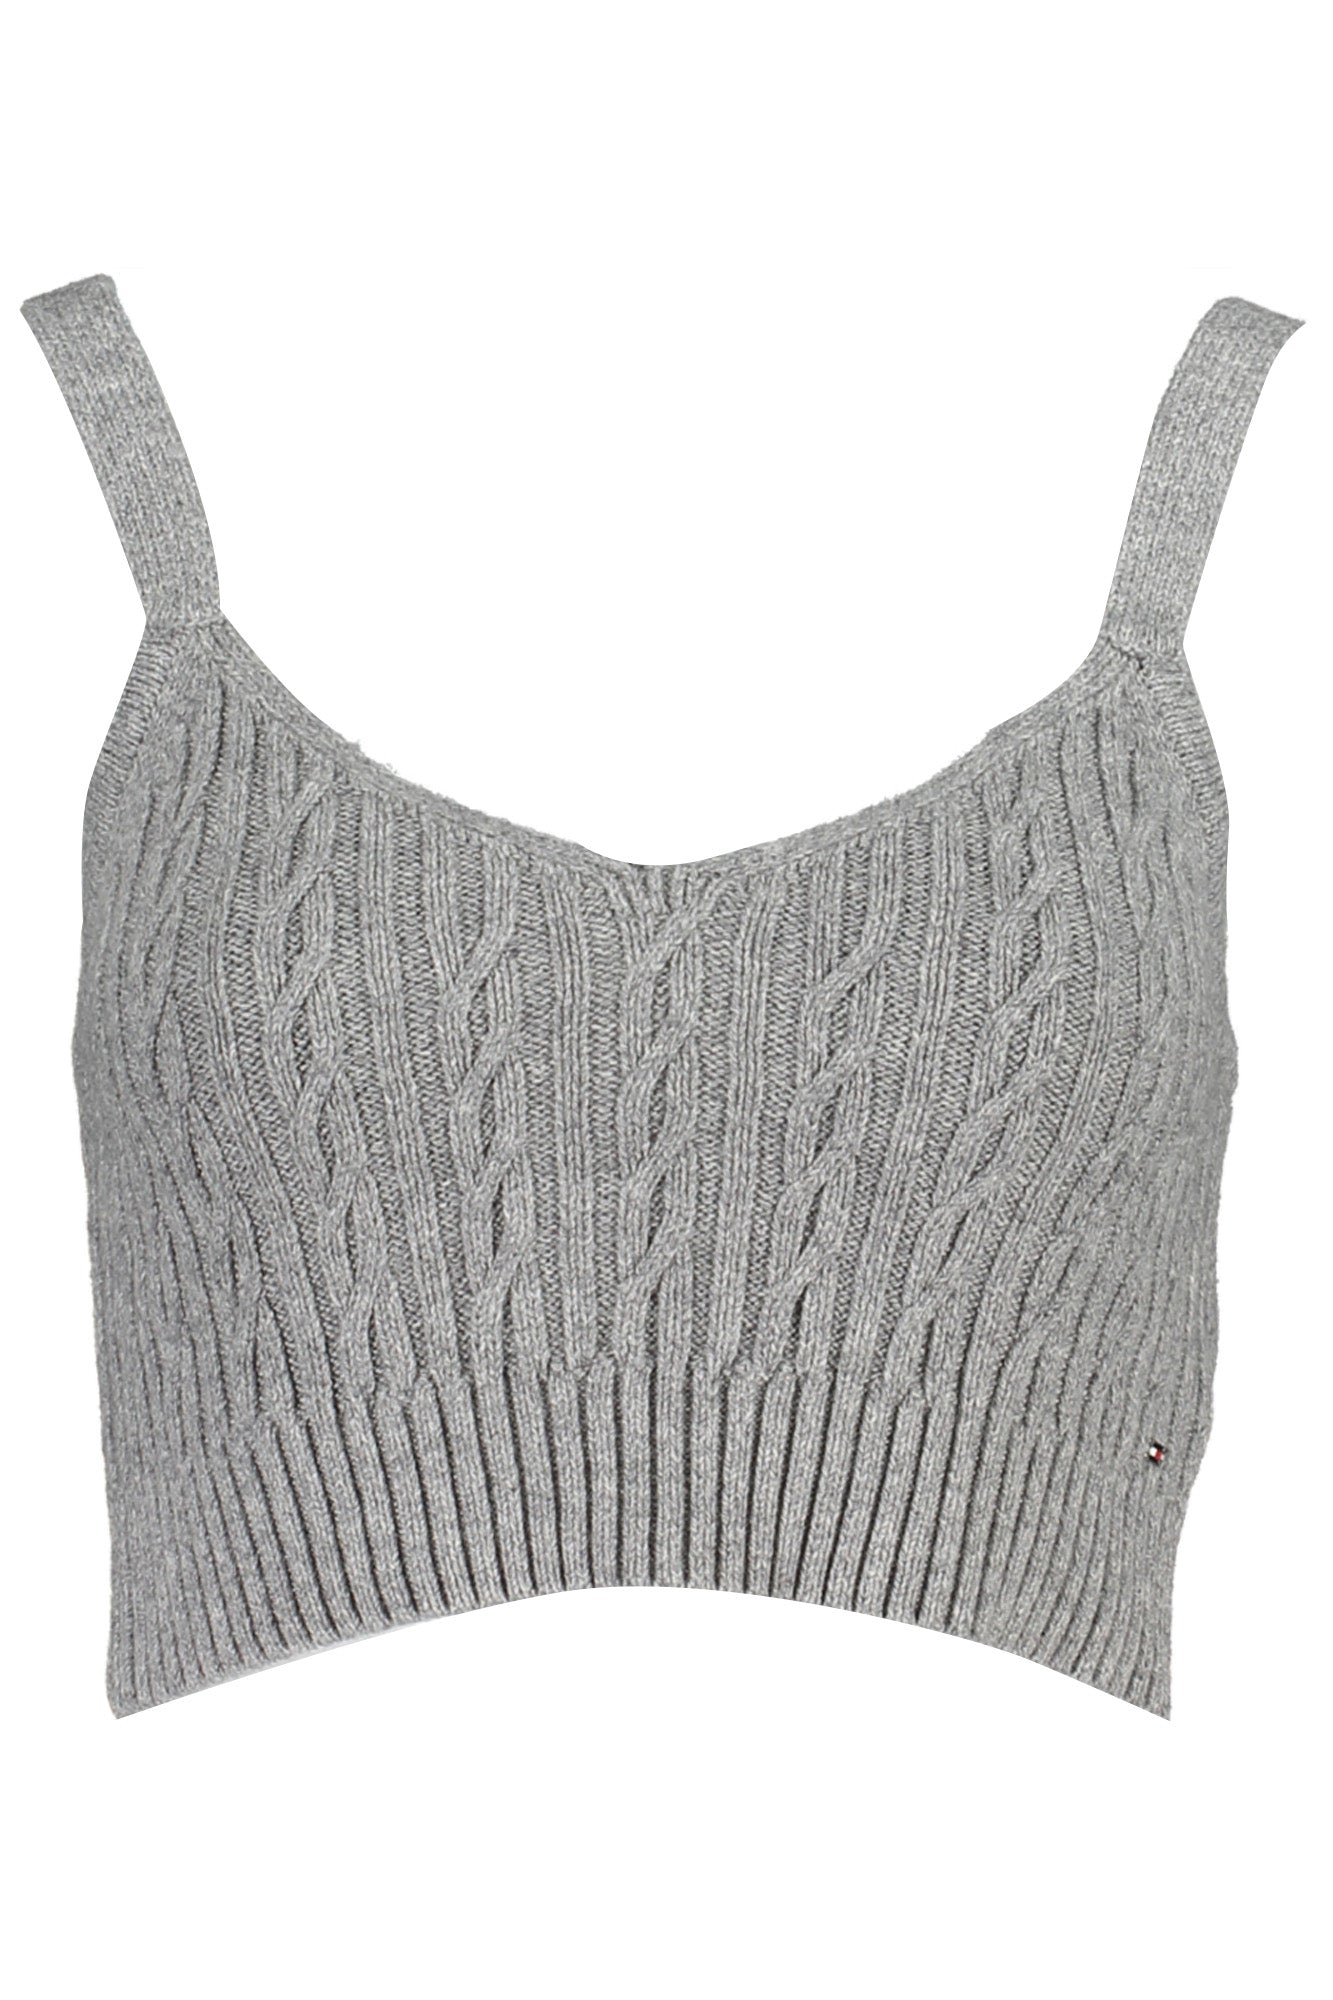 TOMMY HILFIGER GRAY WOMEN'S TOP-0